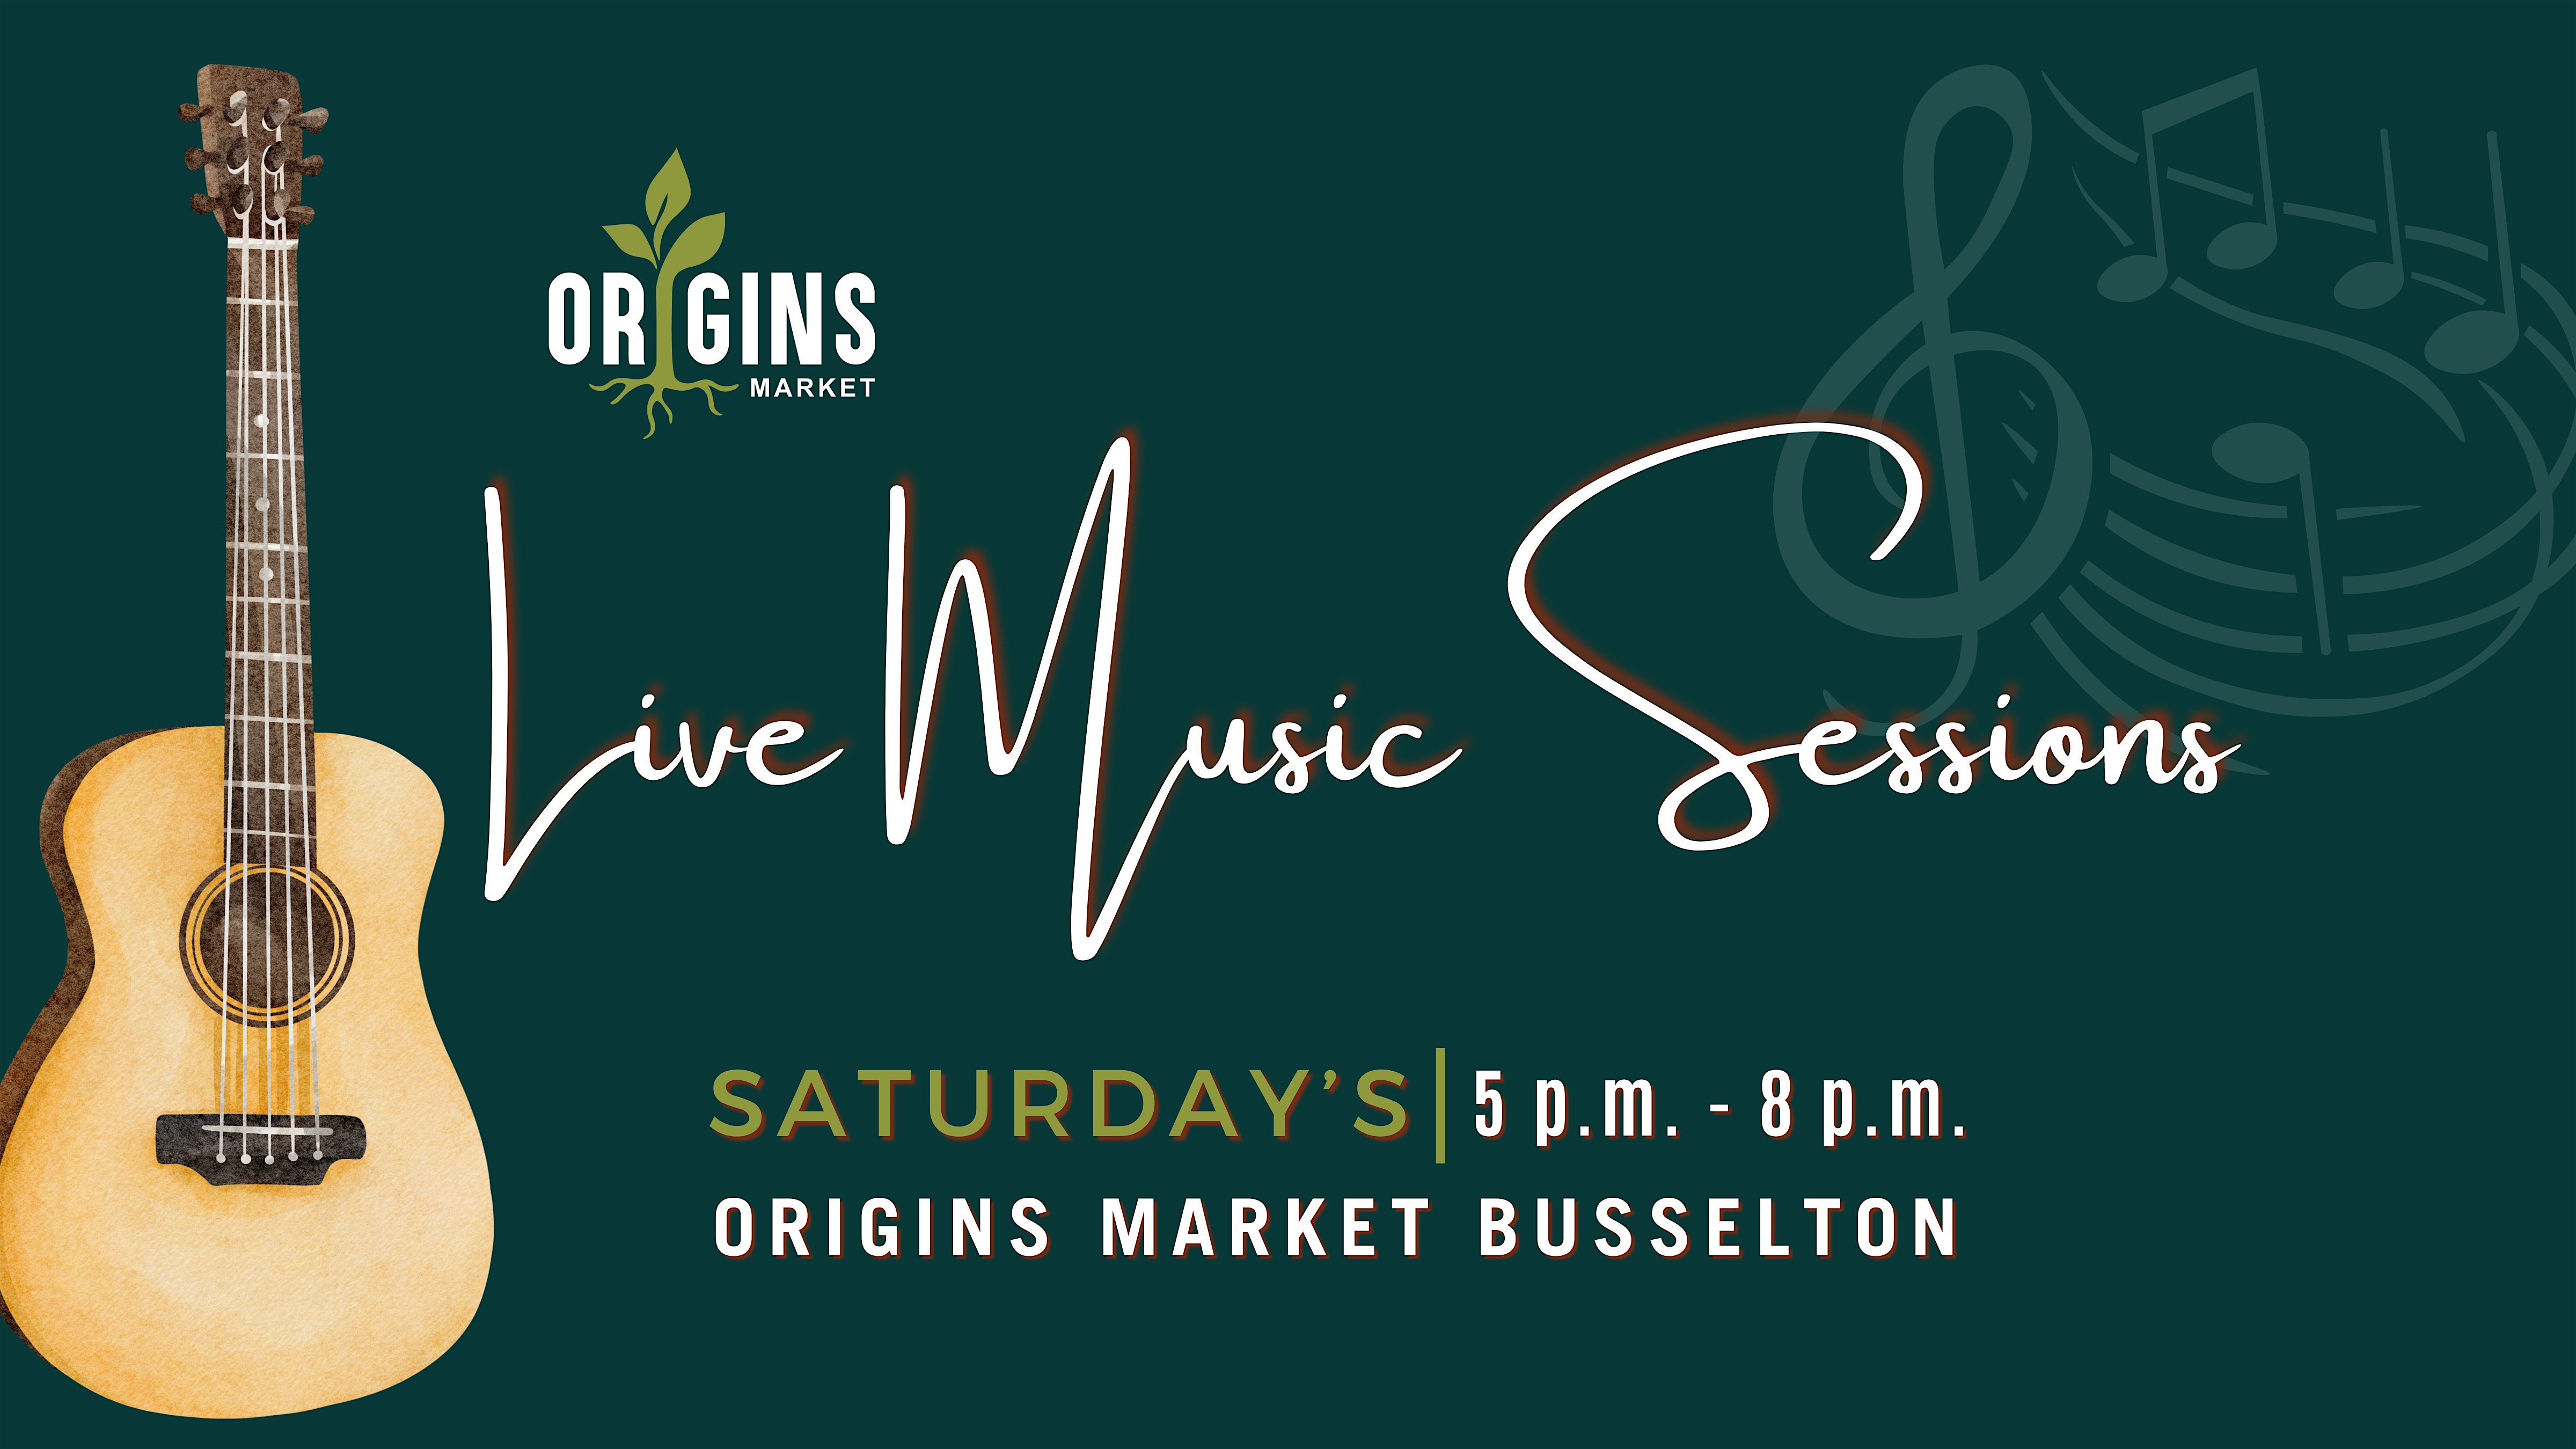 Live Music Sessions at Origins